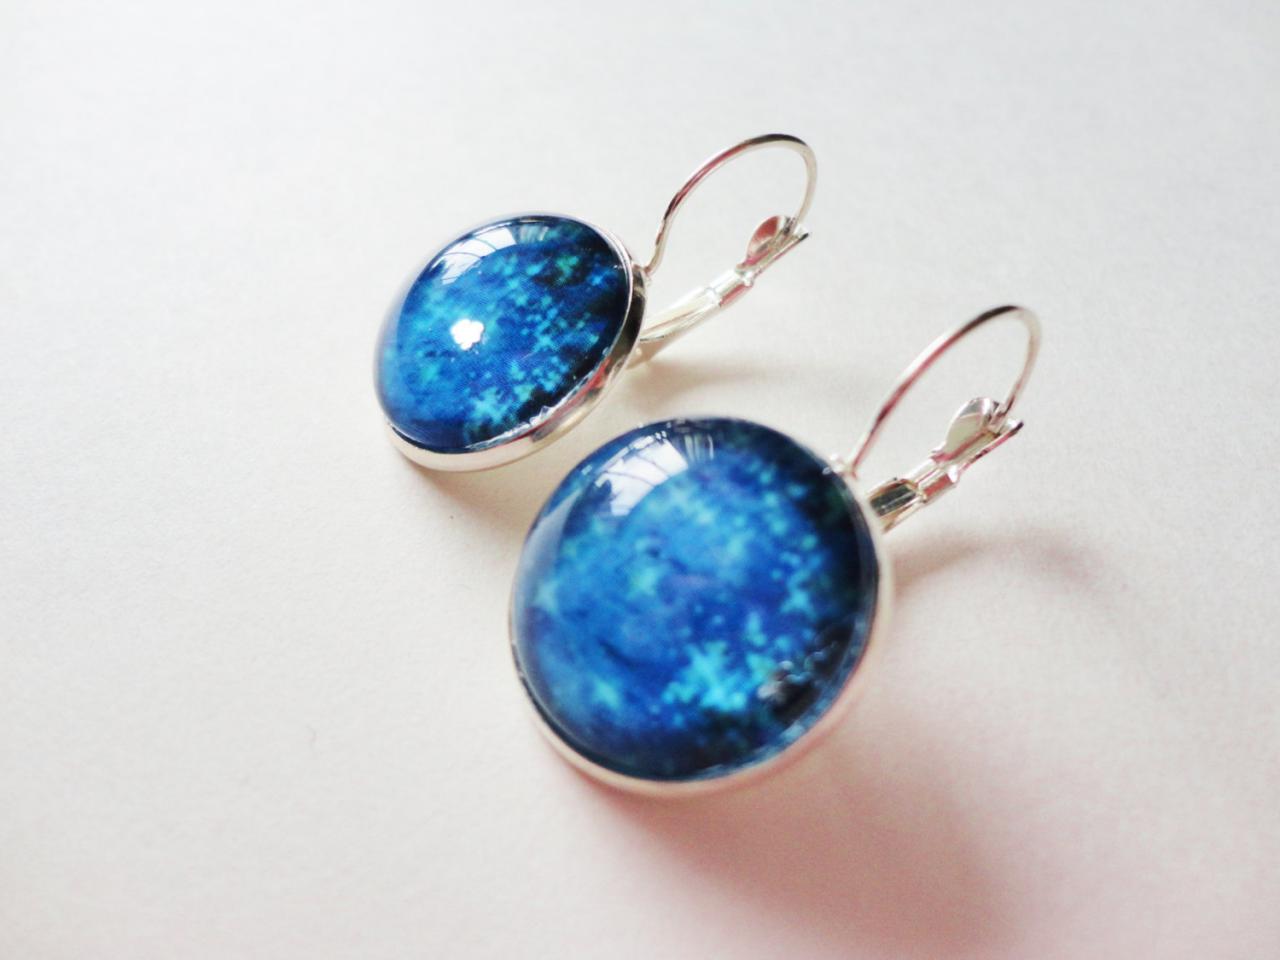 Galactic Scales - Bold Blue Stars Fine Art Earrings, French Clasp Lever Back Stylish Modern Dangle Silver Plated 18mm Round Glass Dome Ooak